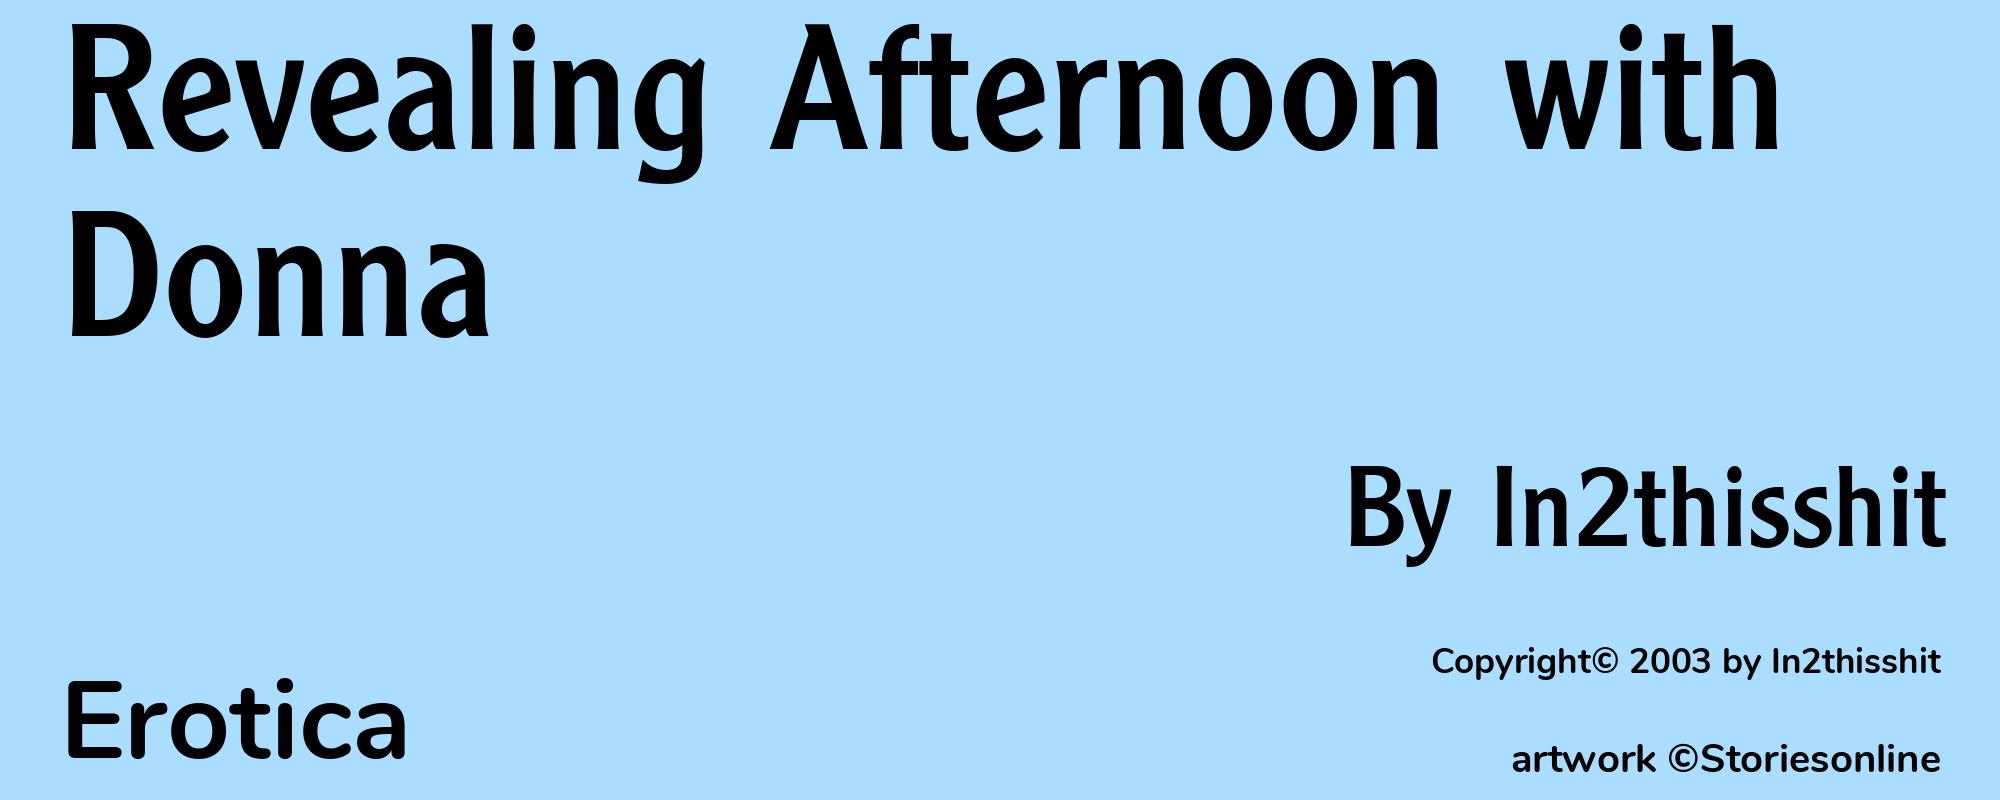 Revealing Afternoon with Donna - Cover